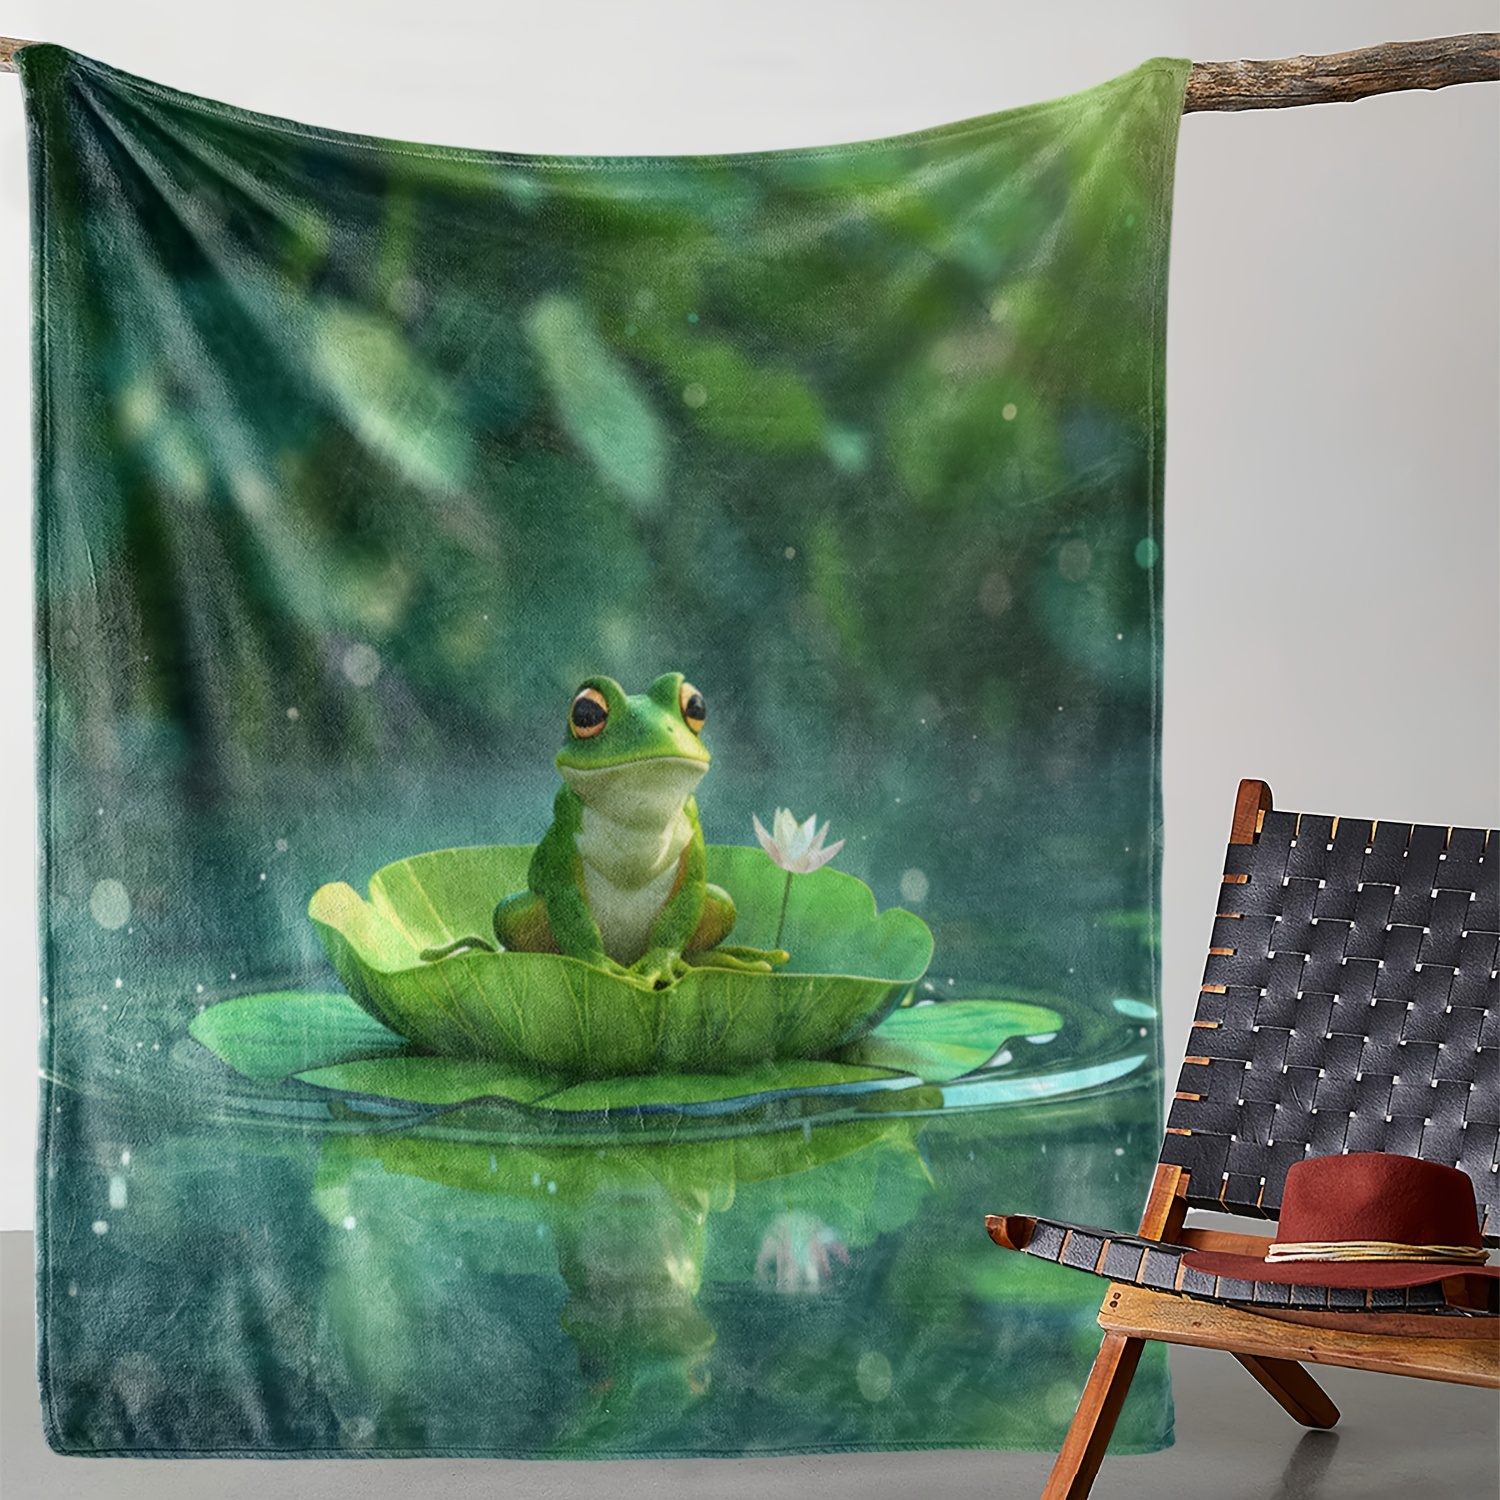 

Cozy Flannel Throw Blanket With For Lotus Leaf & Frog Design - Soft, Warm, And Versatile For Couch, Bed, Car, Office, Camping, And Travel - Perfect All-season Gift